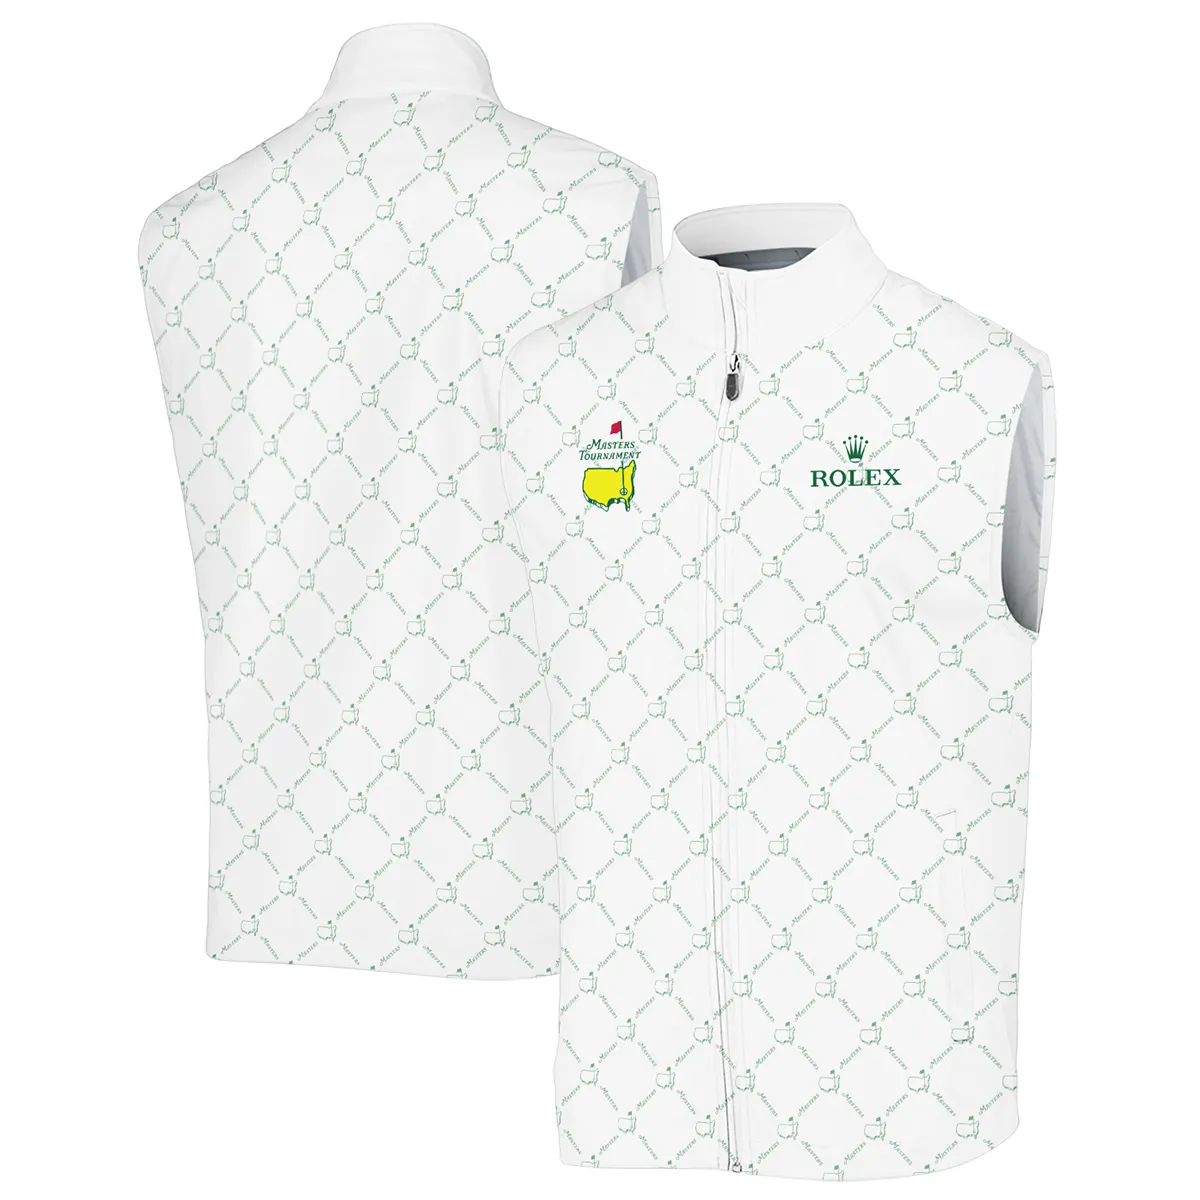 Golf Sport Pattern Color White Mix Masters Tournament Rolex Hoodie Shirt Style Classic